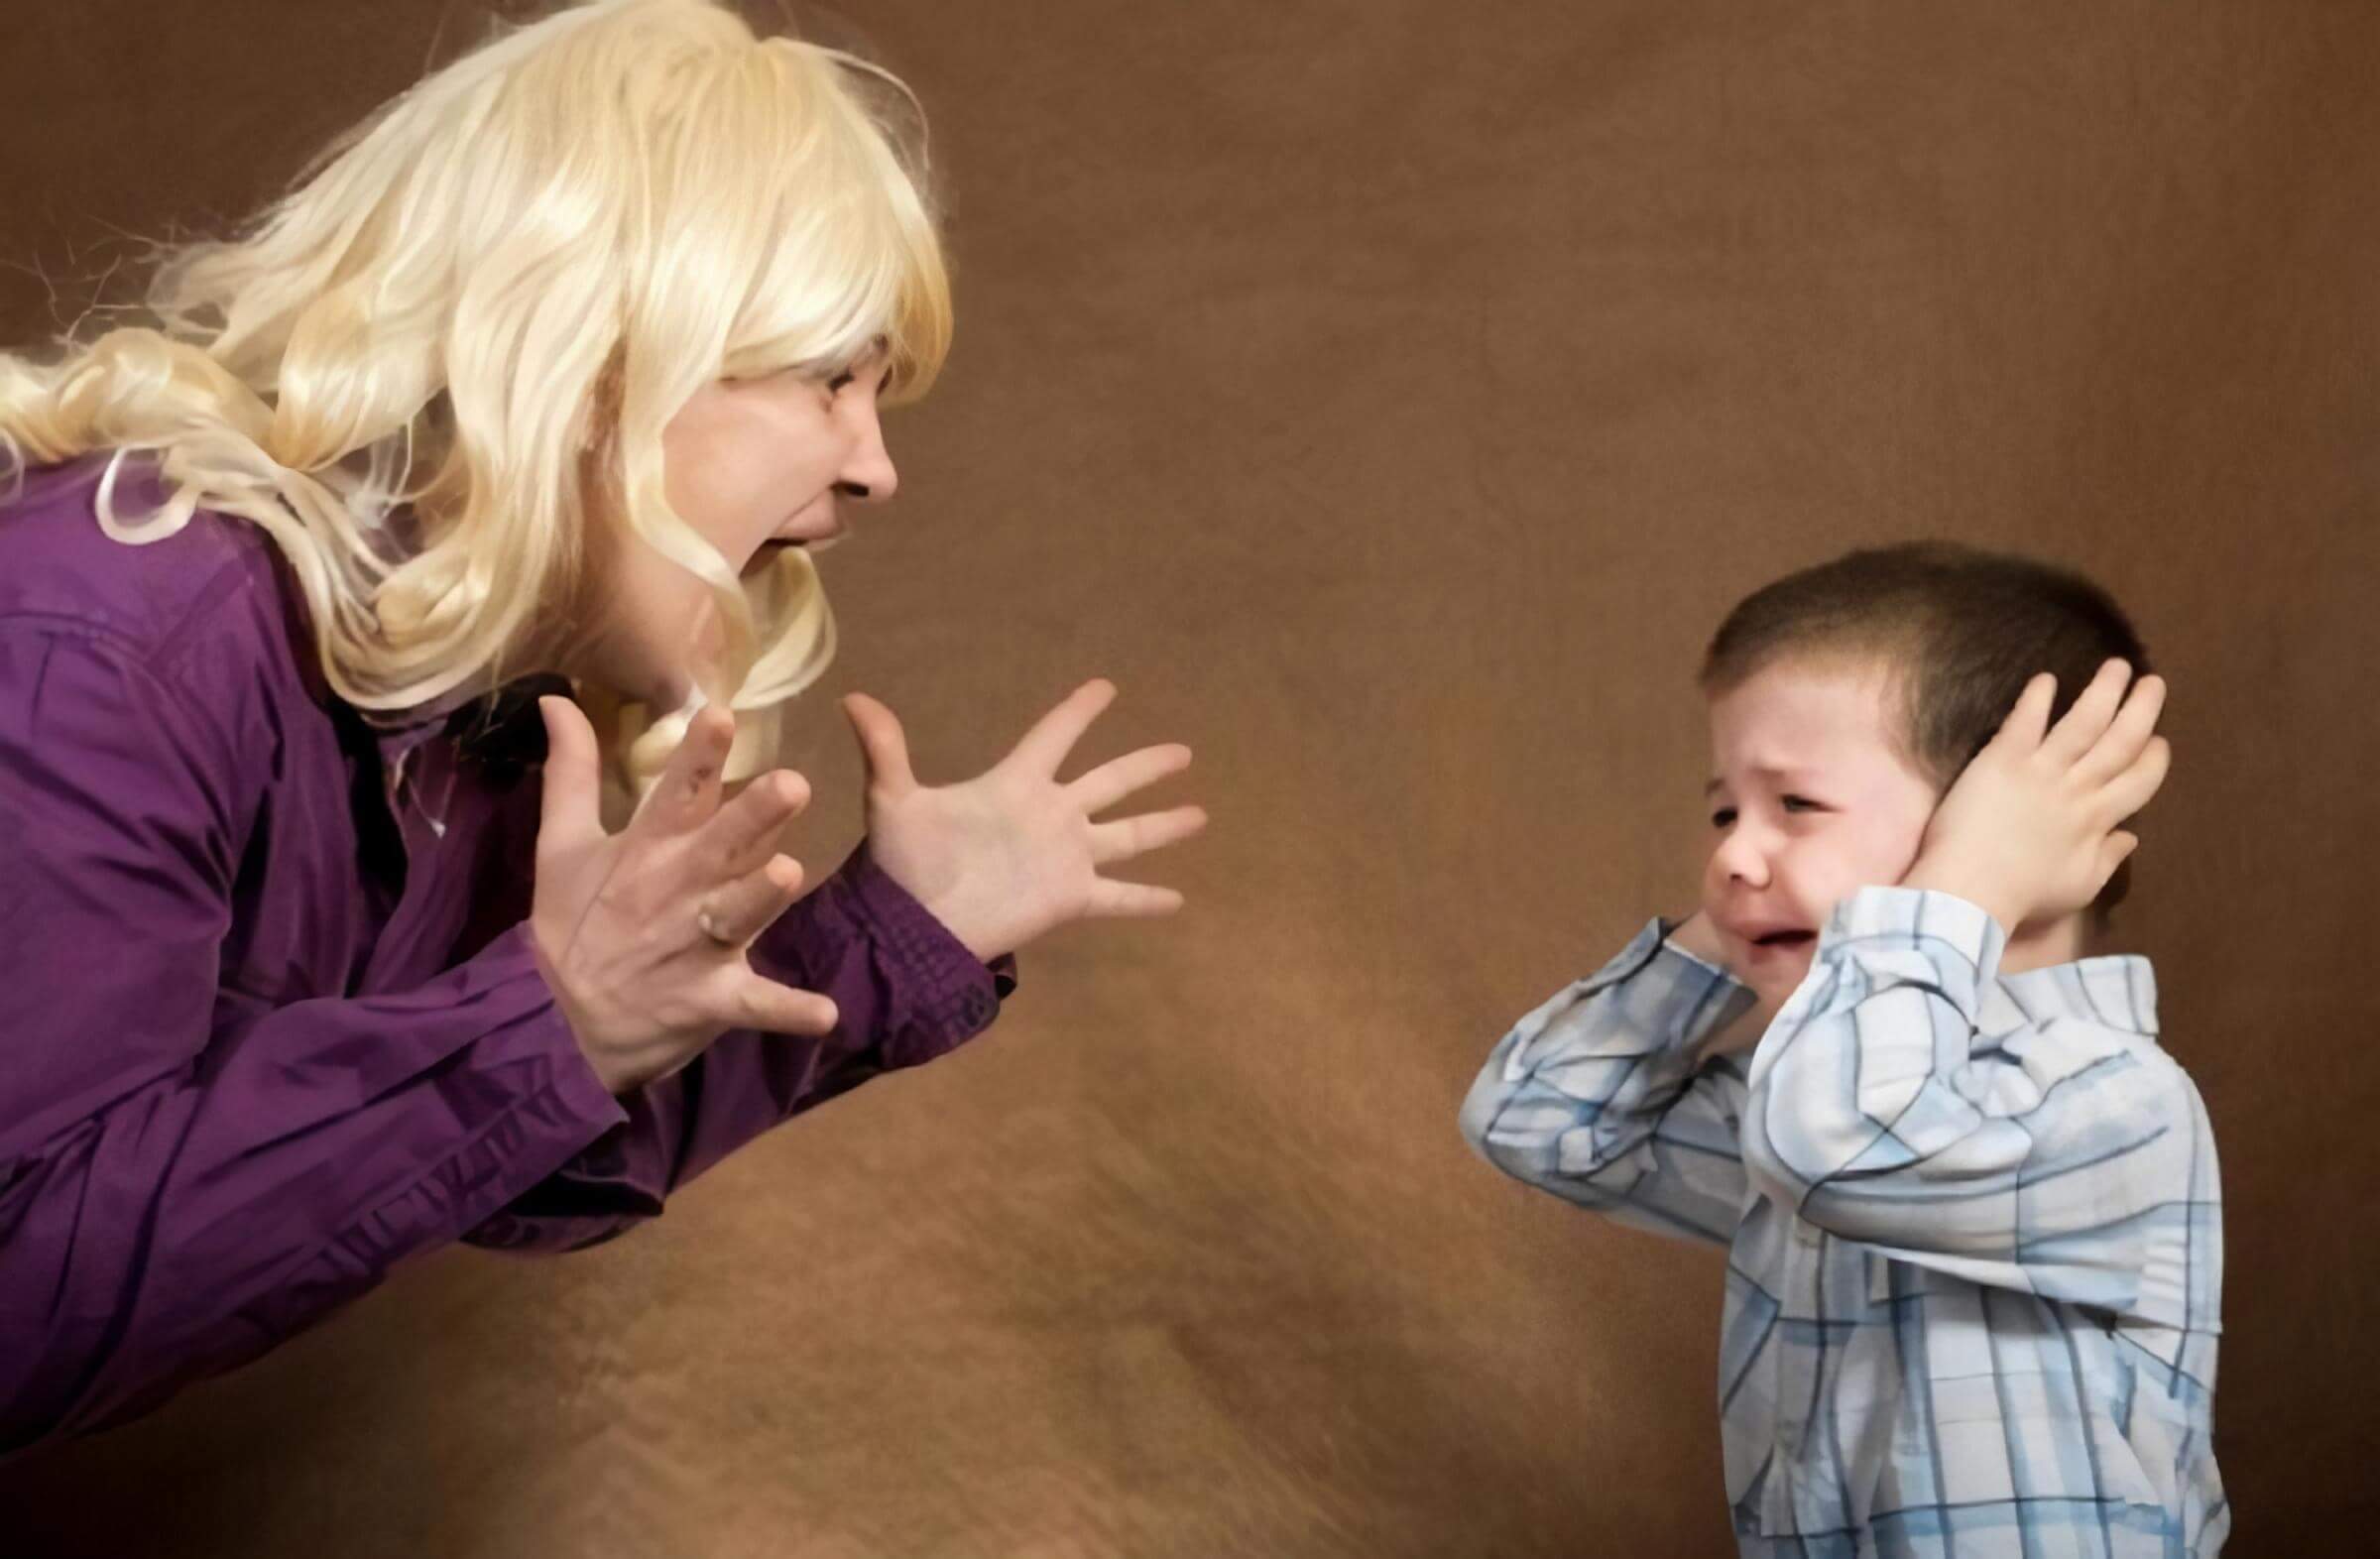 A mother screaming at her toddler son as he cries and covers his ears.